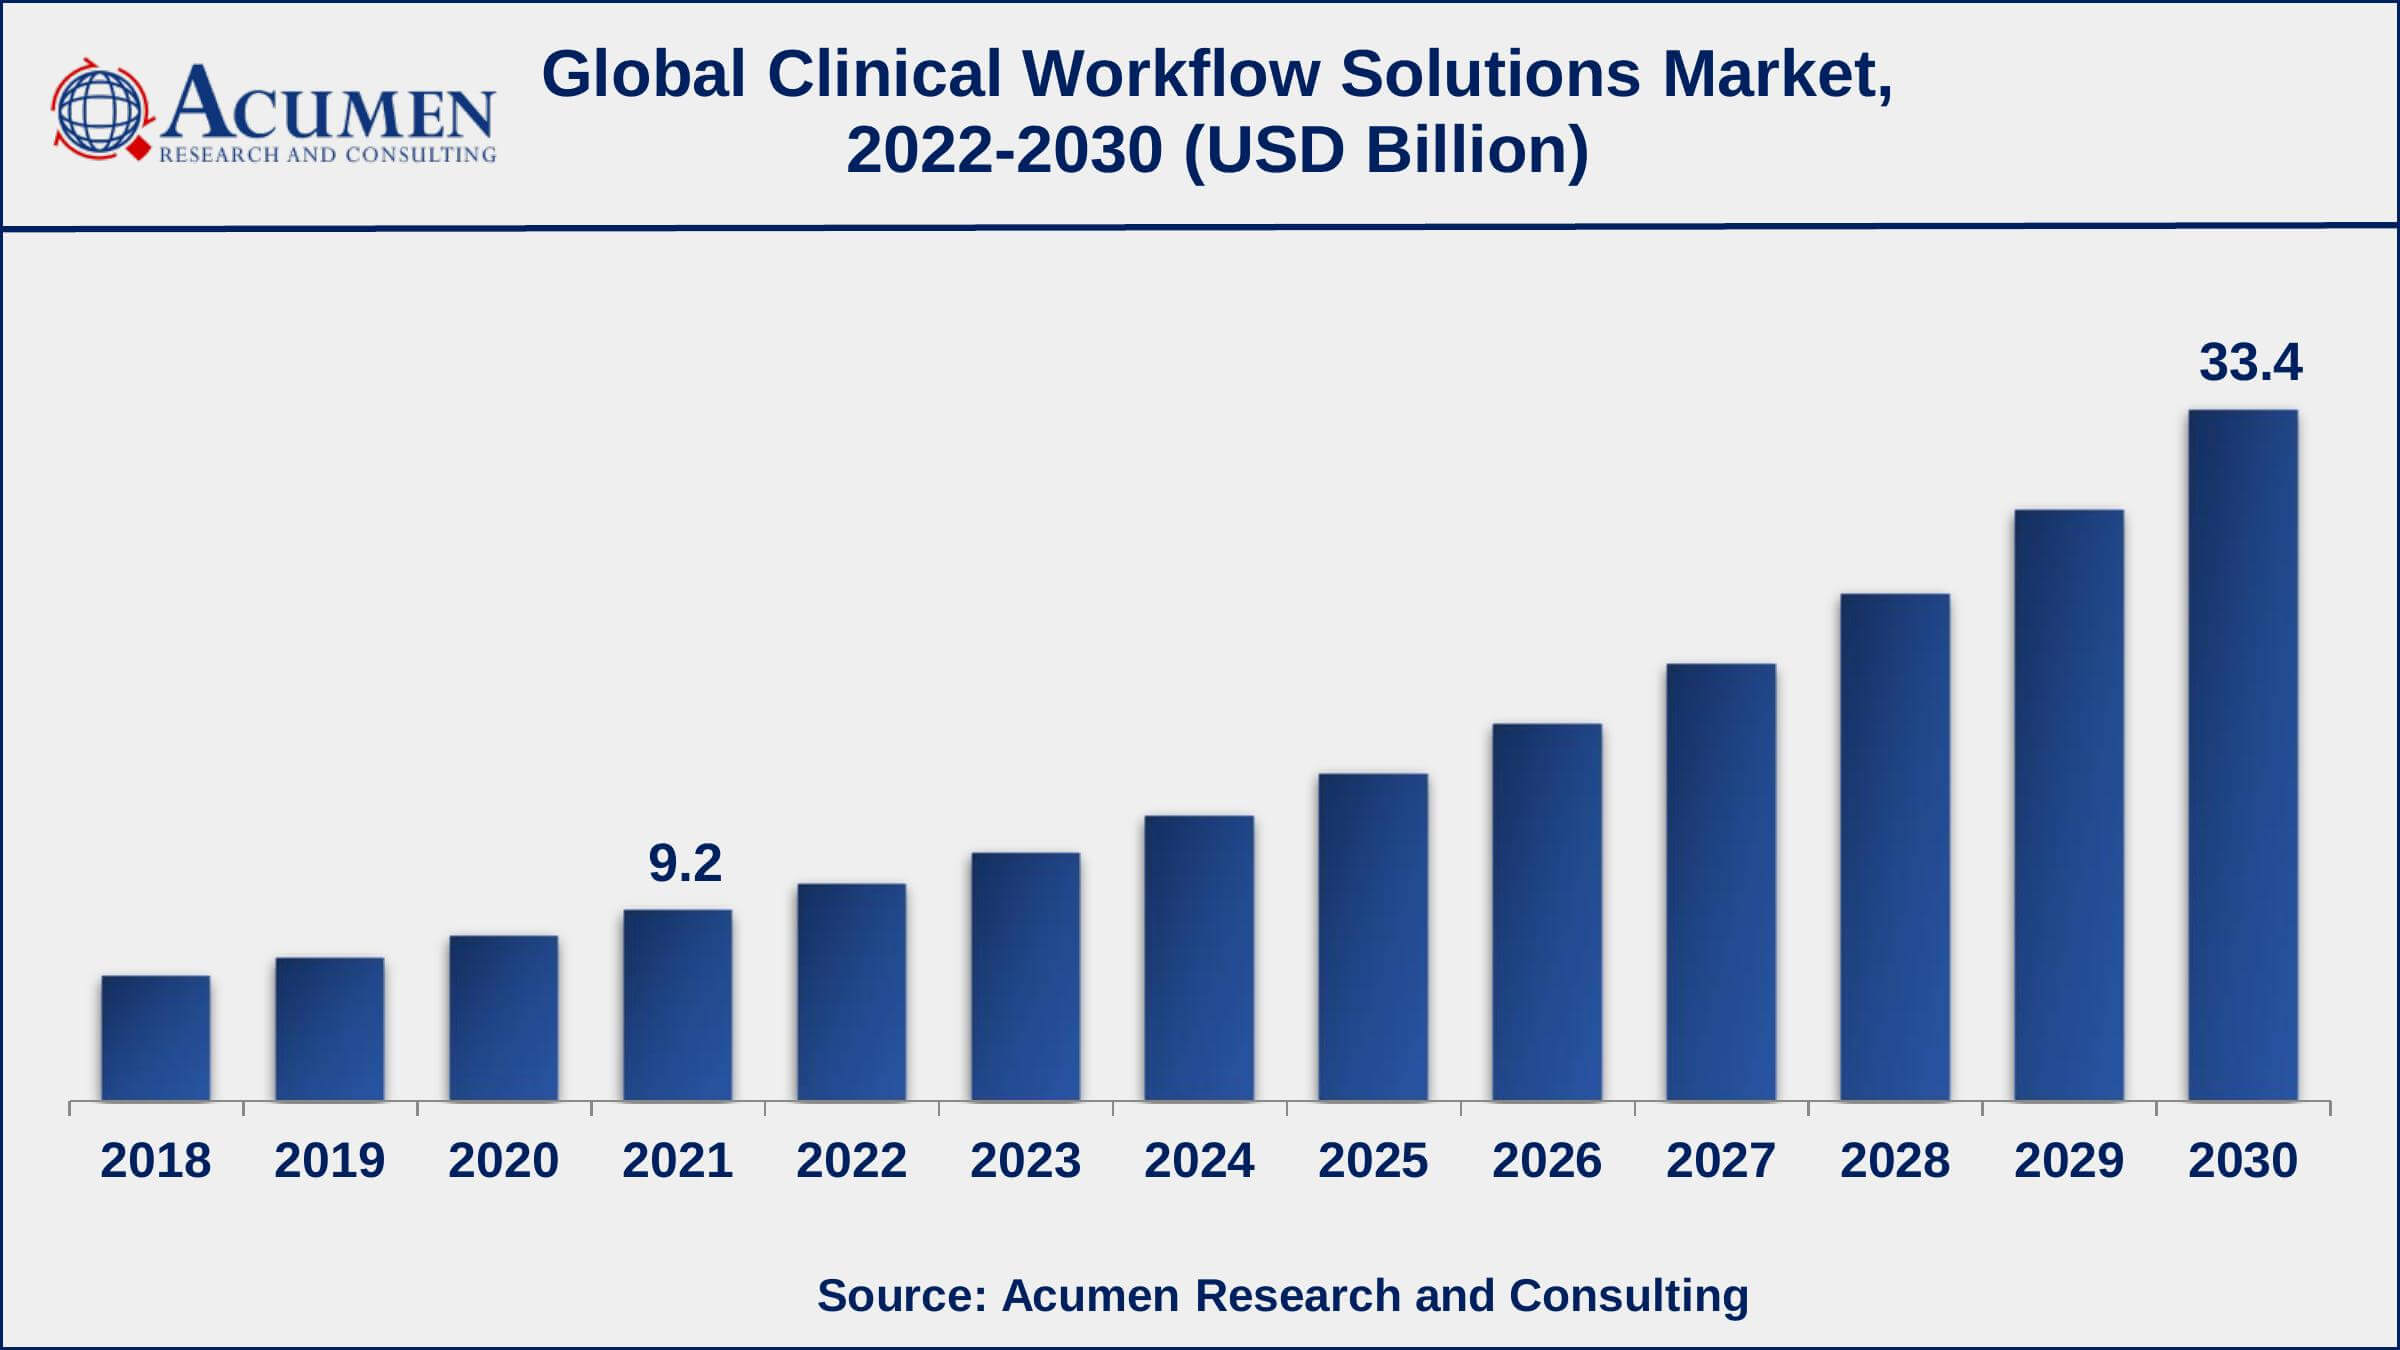 Asia-Pacific clinical workflow solutions market growth will record a CAGR of more than 16% from 2022 to 2030